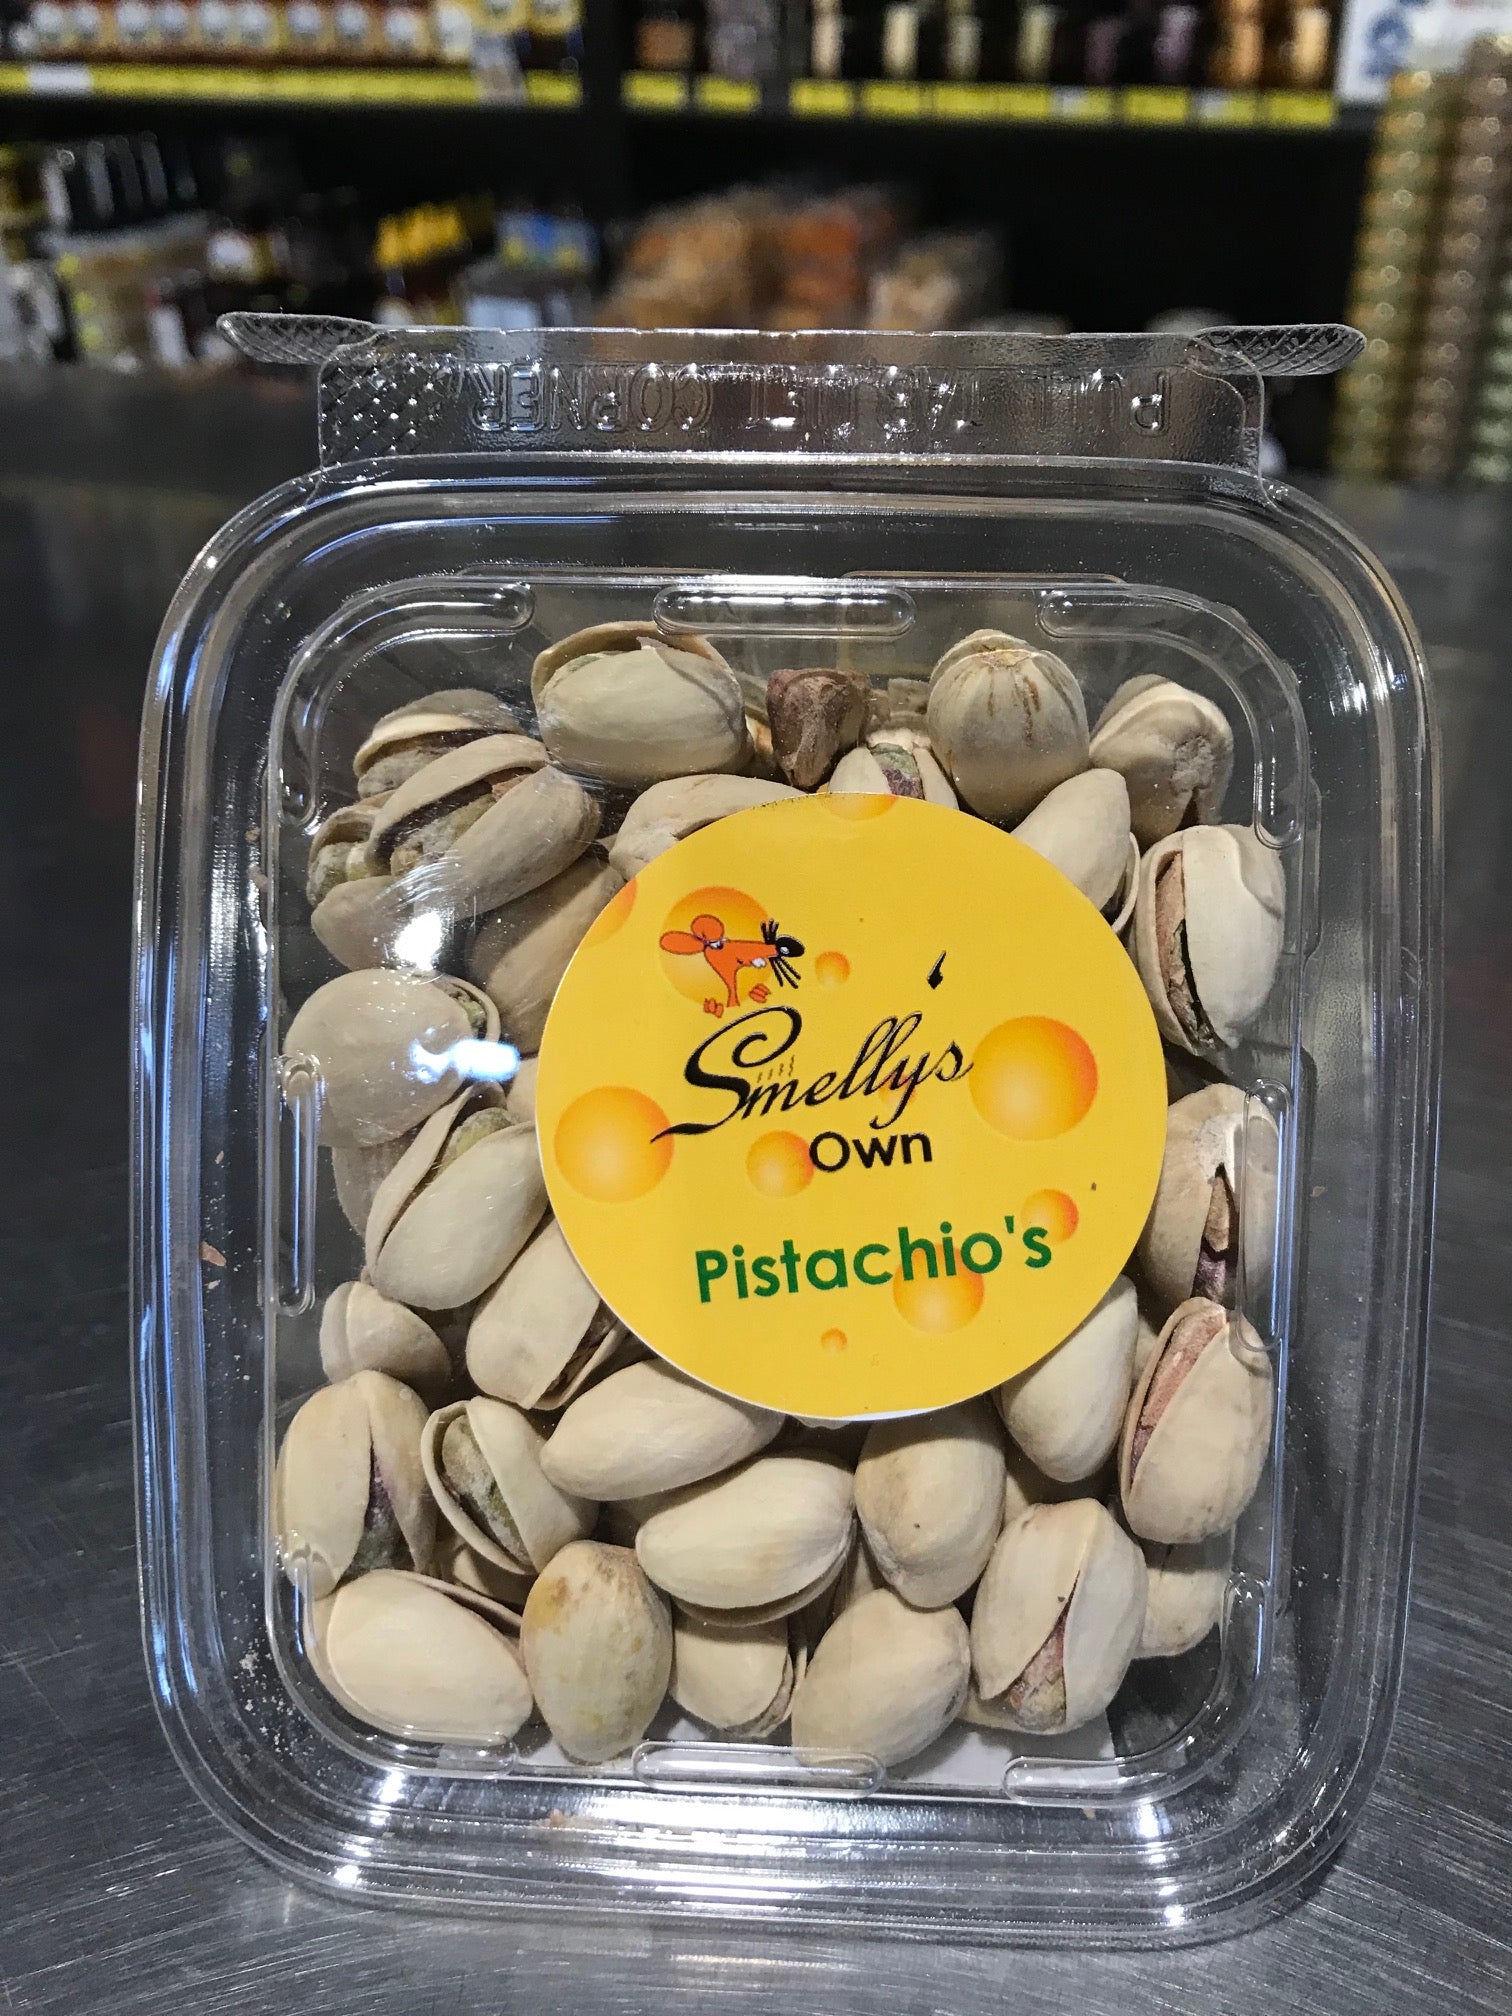 Smelly's Own - Pistachios - Approximately 120g = $8.16 including GST